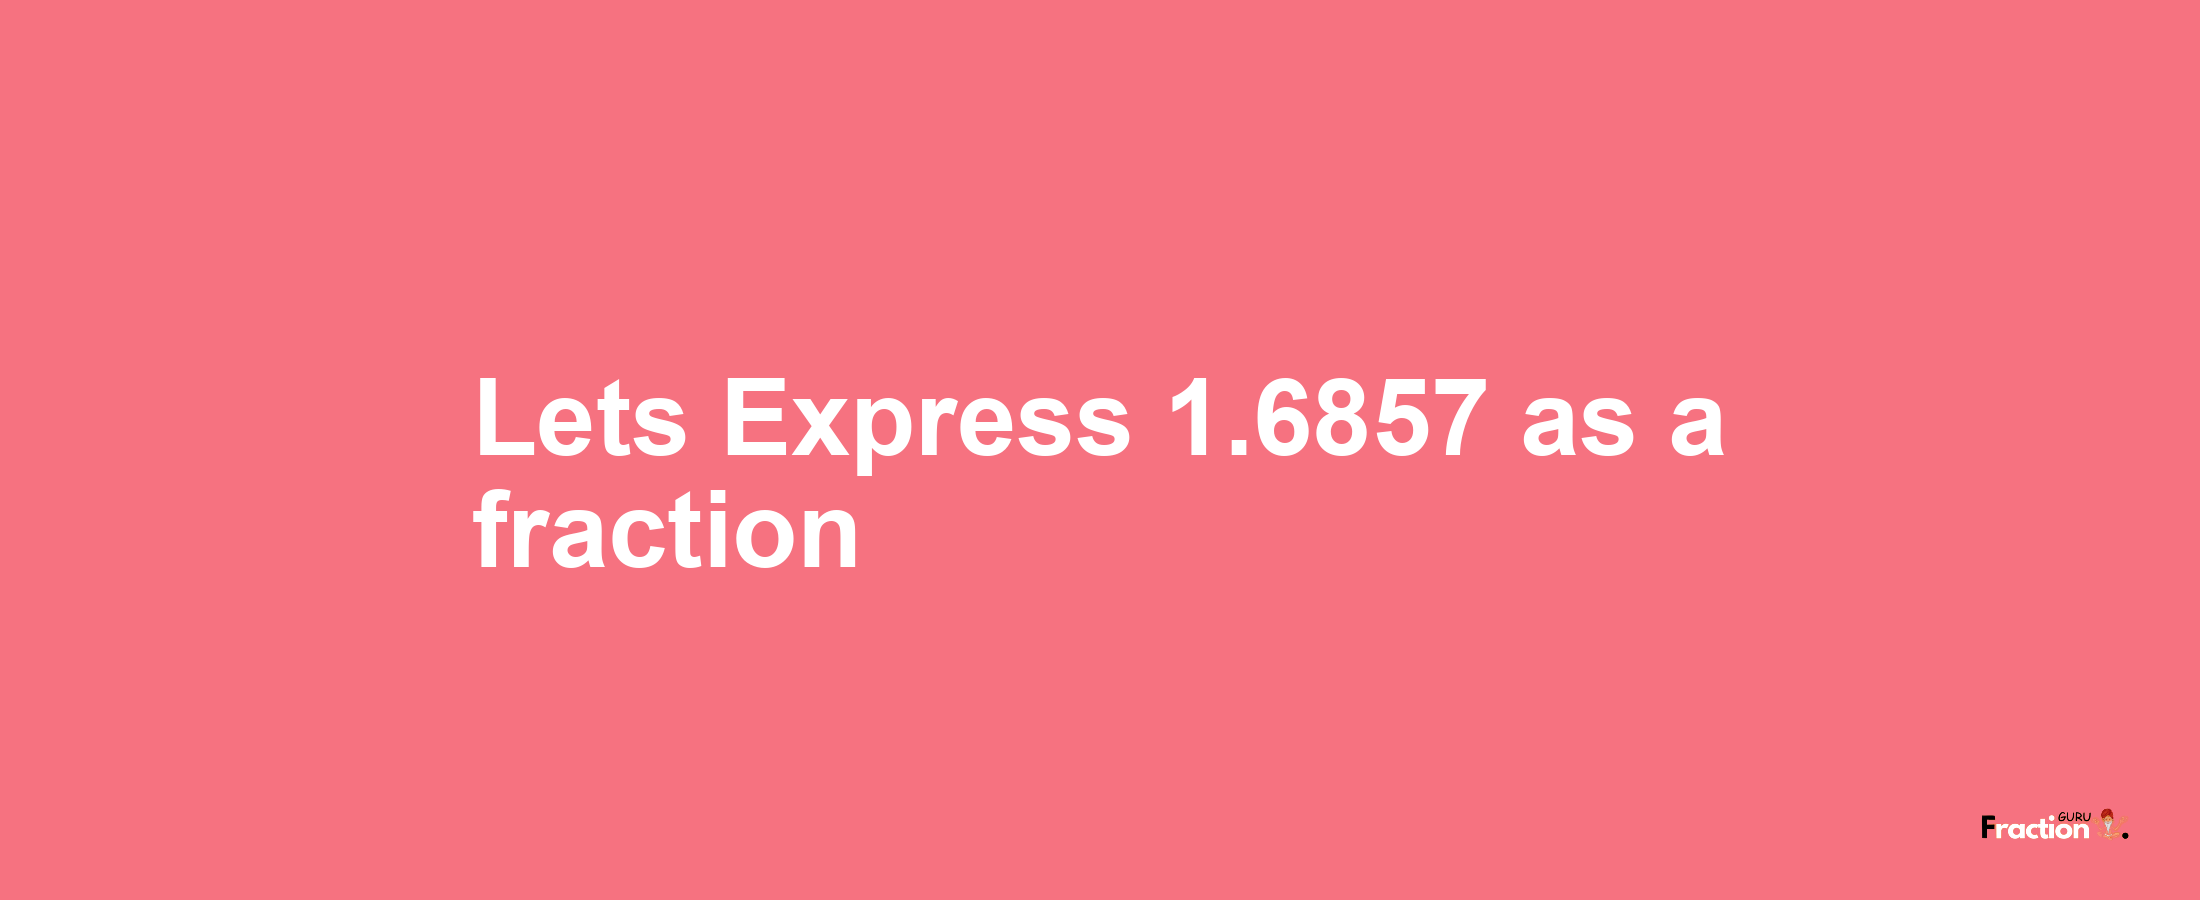 Lets Express 1.6857 as afraction